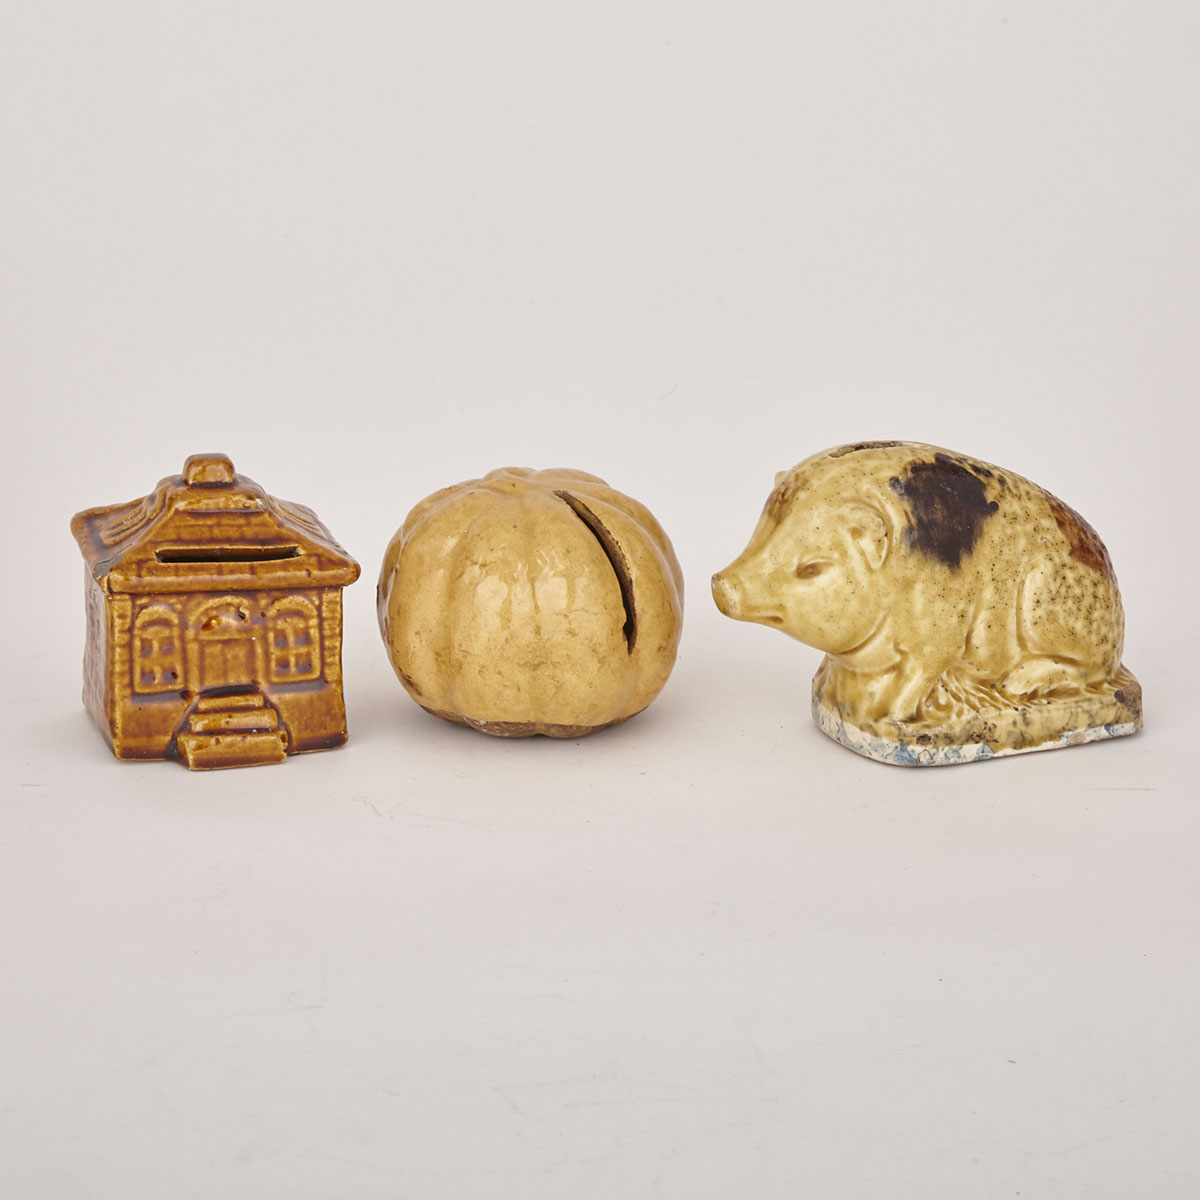 Three Pottery Coin Banks, 19th century